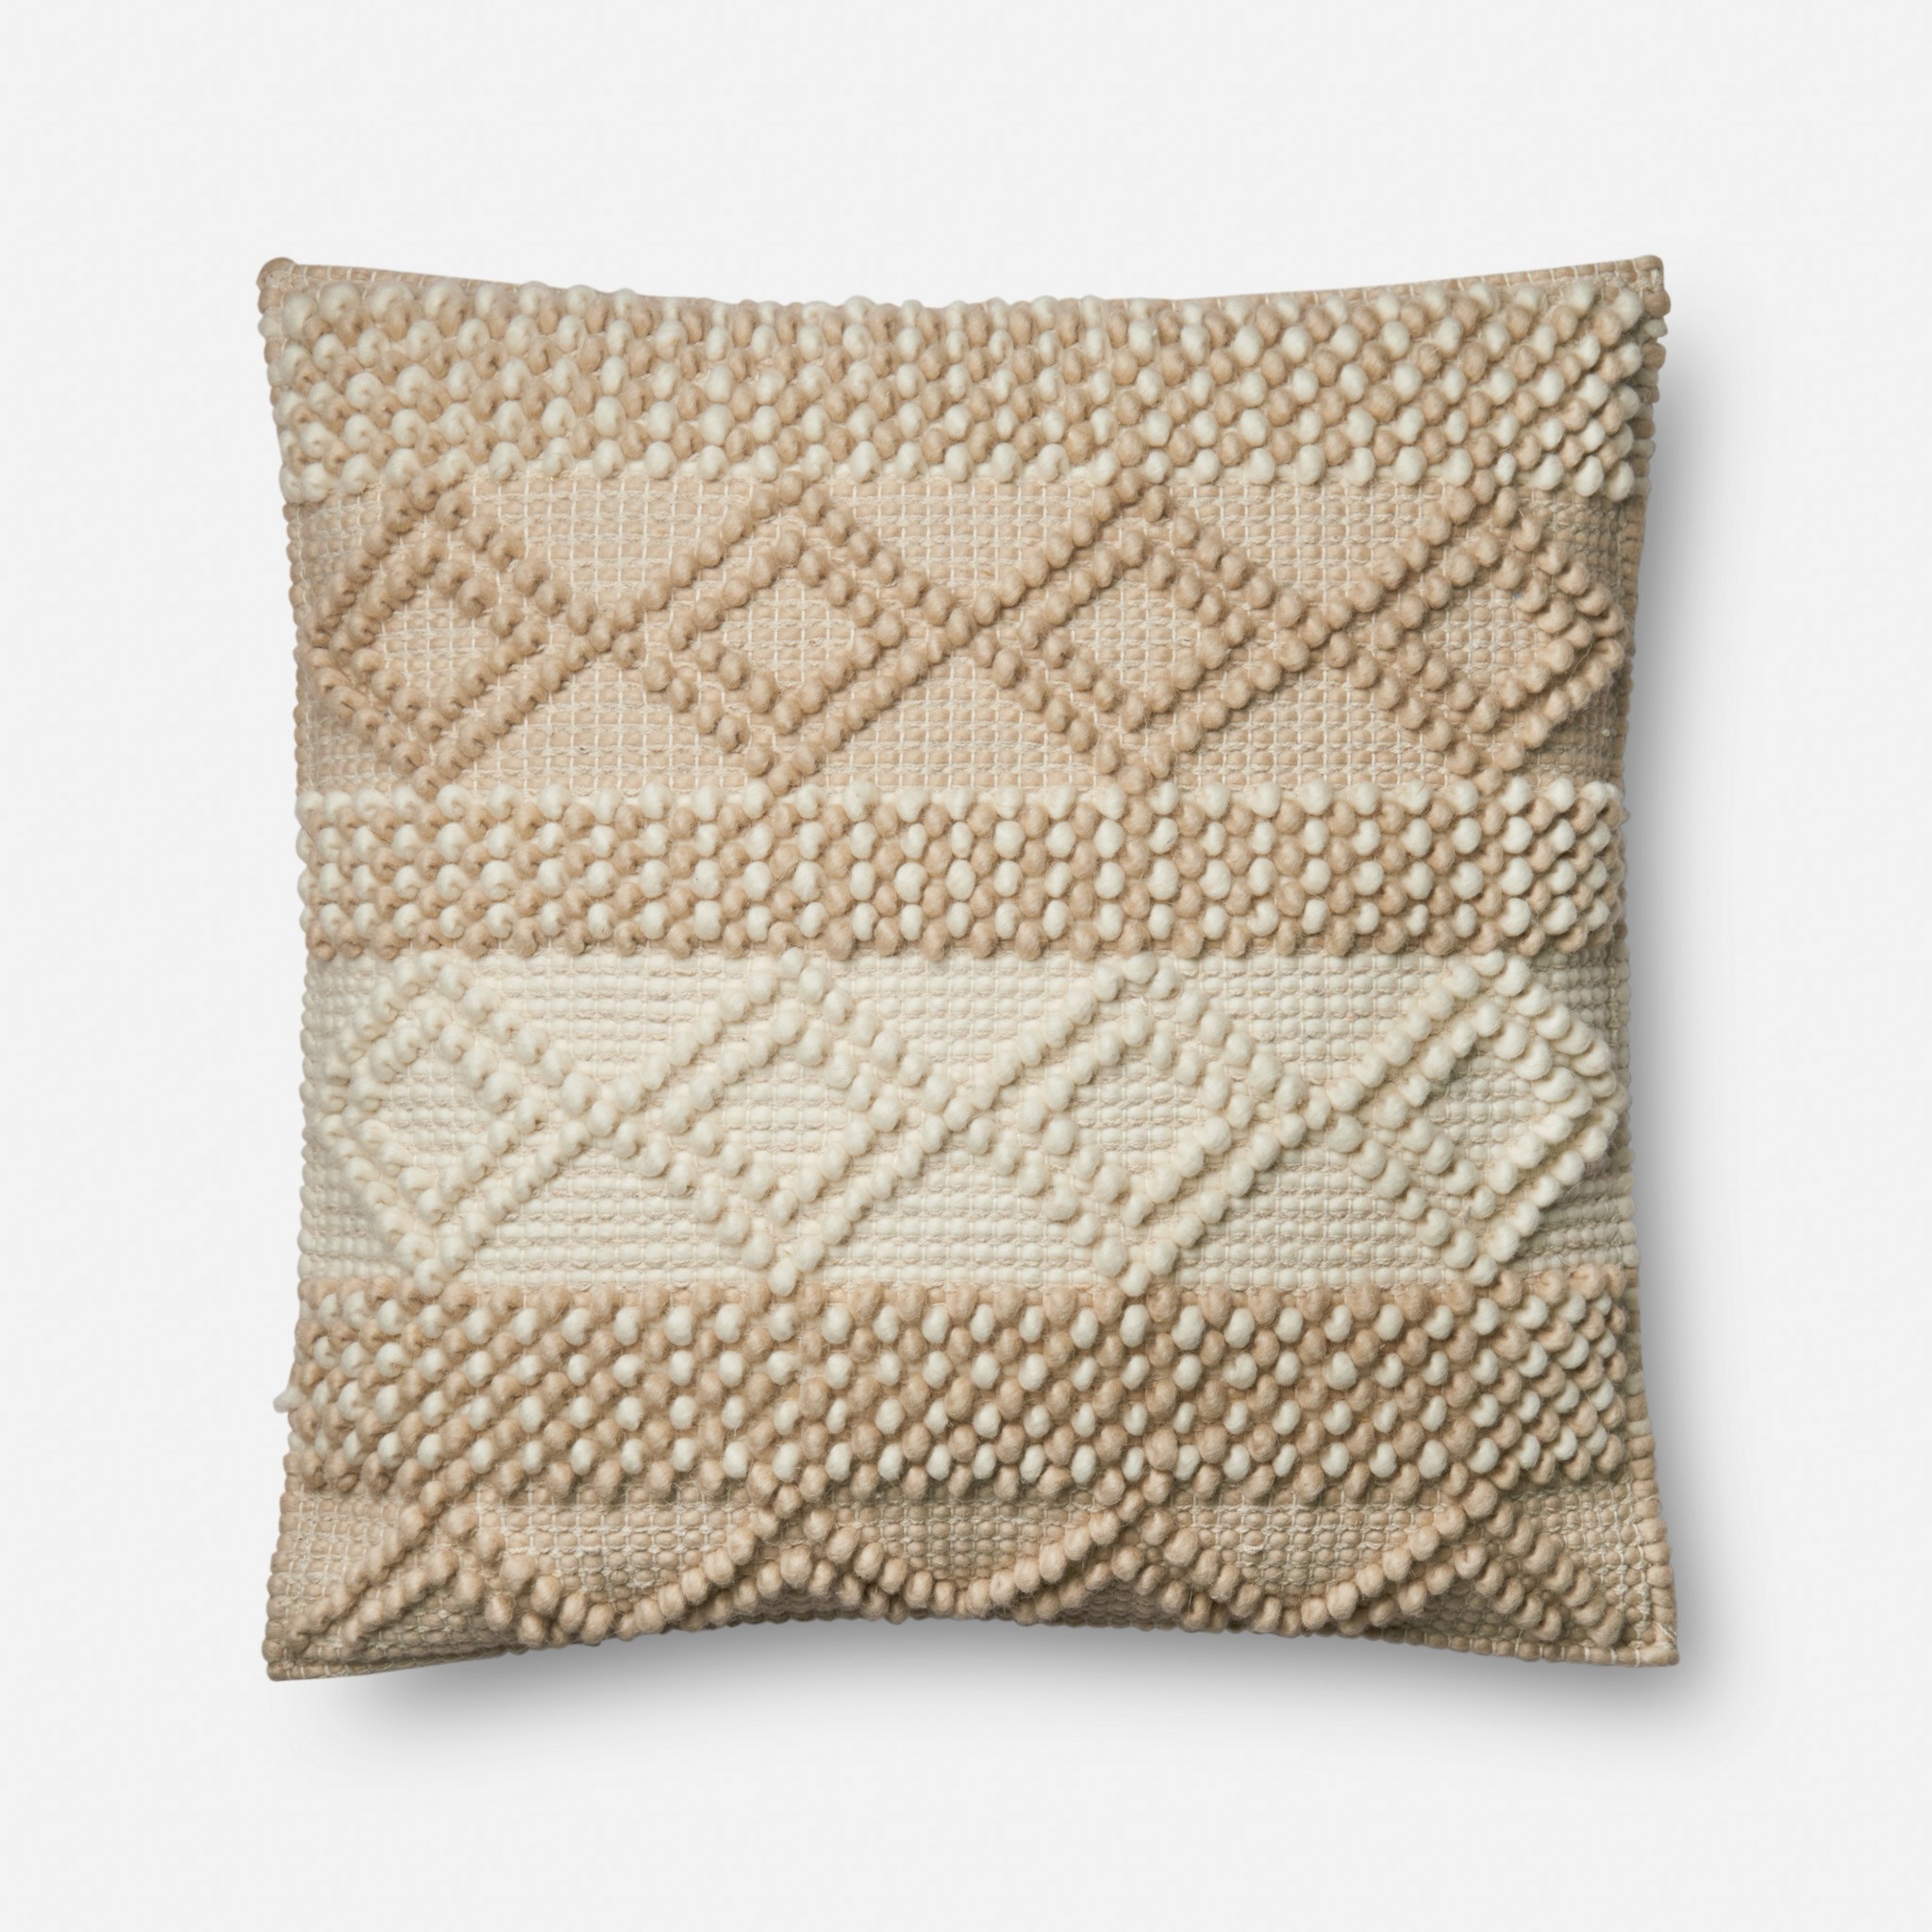 PILLOWS - BEIGE / IVORY 22x22 - Image 0